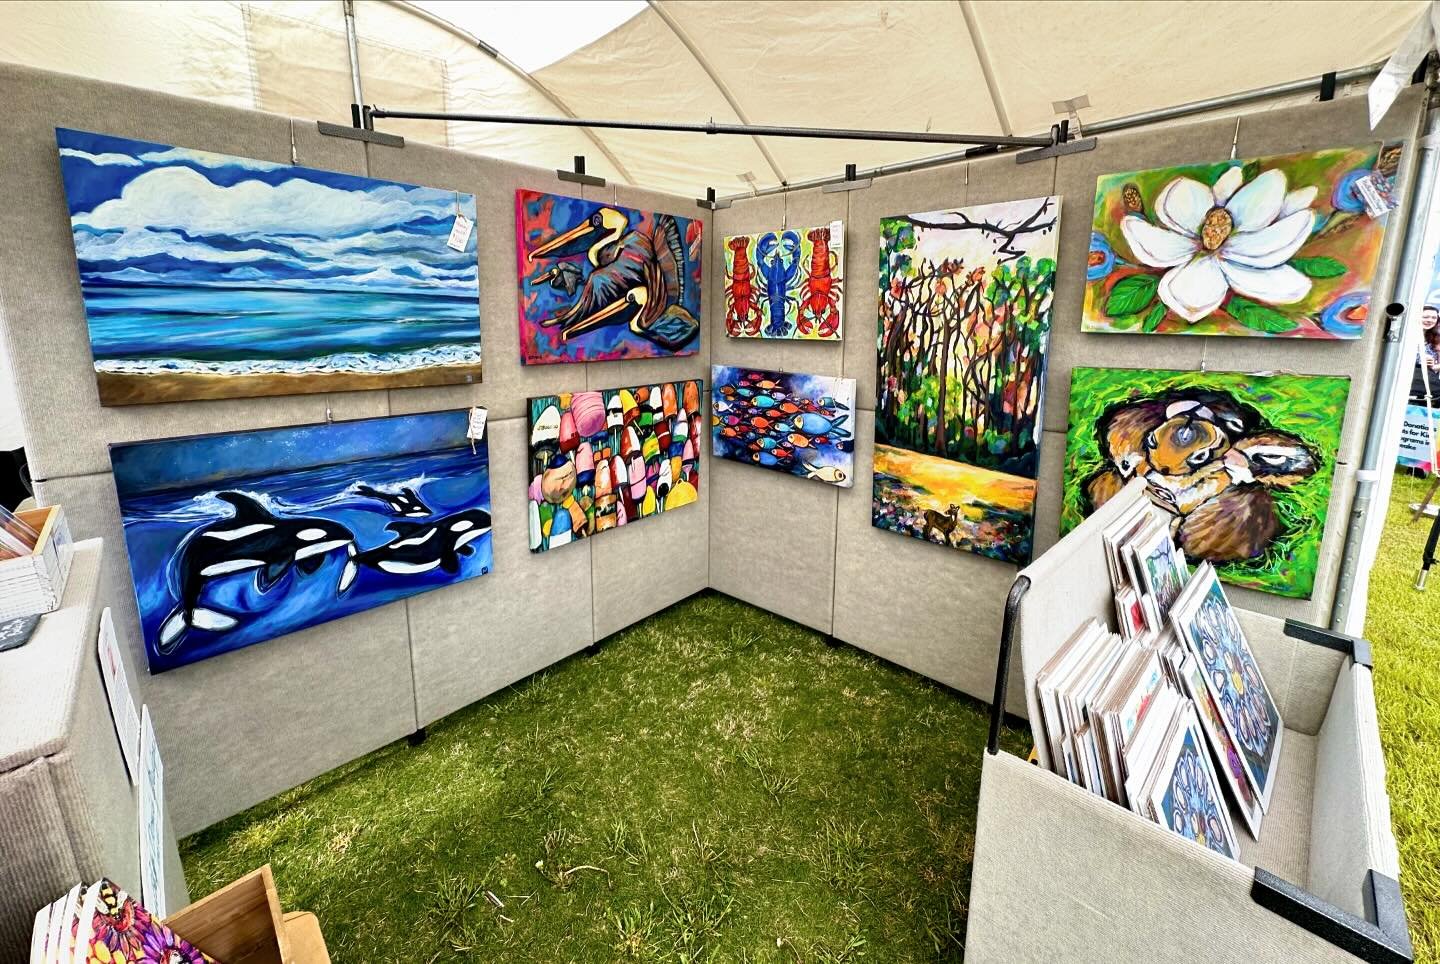 All set up for @chesartsfest! Busy already! Here today until 6pm and Sunday 11-5pm.

#ArtFestival, #ArtShow, #ArtForYourHome, #Painting, #GetOutside